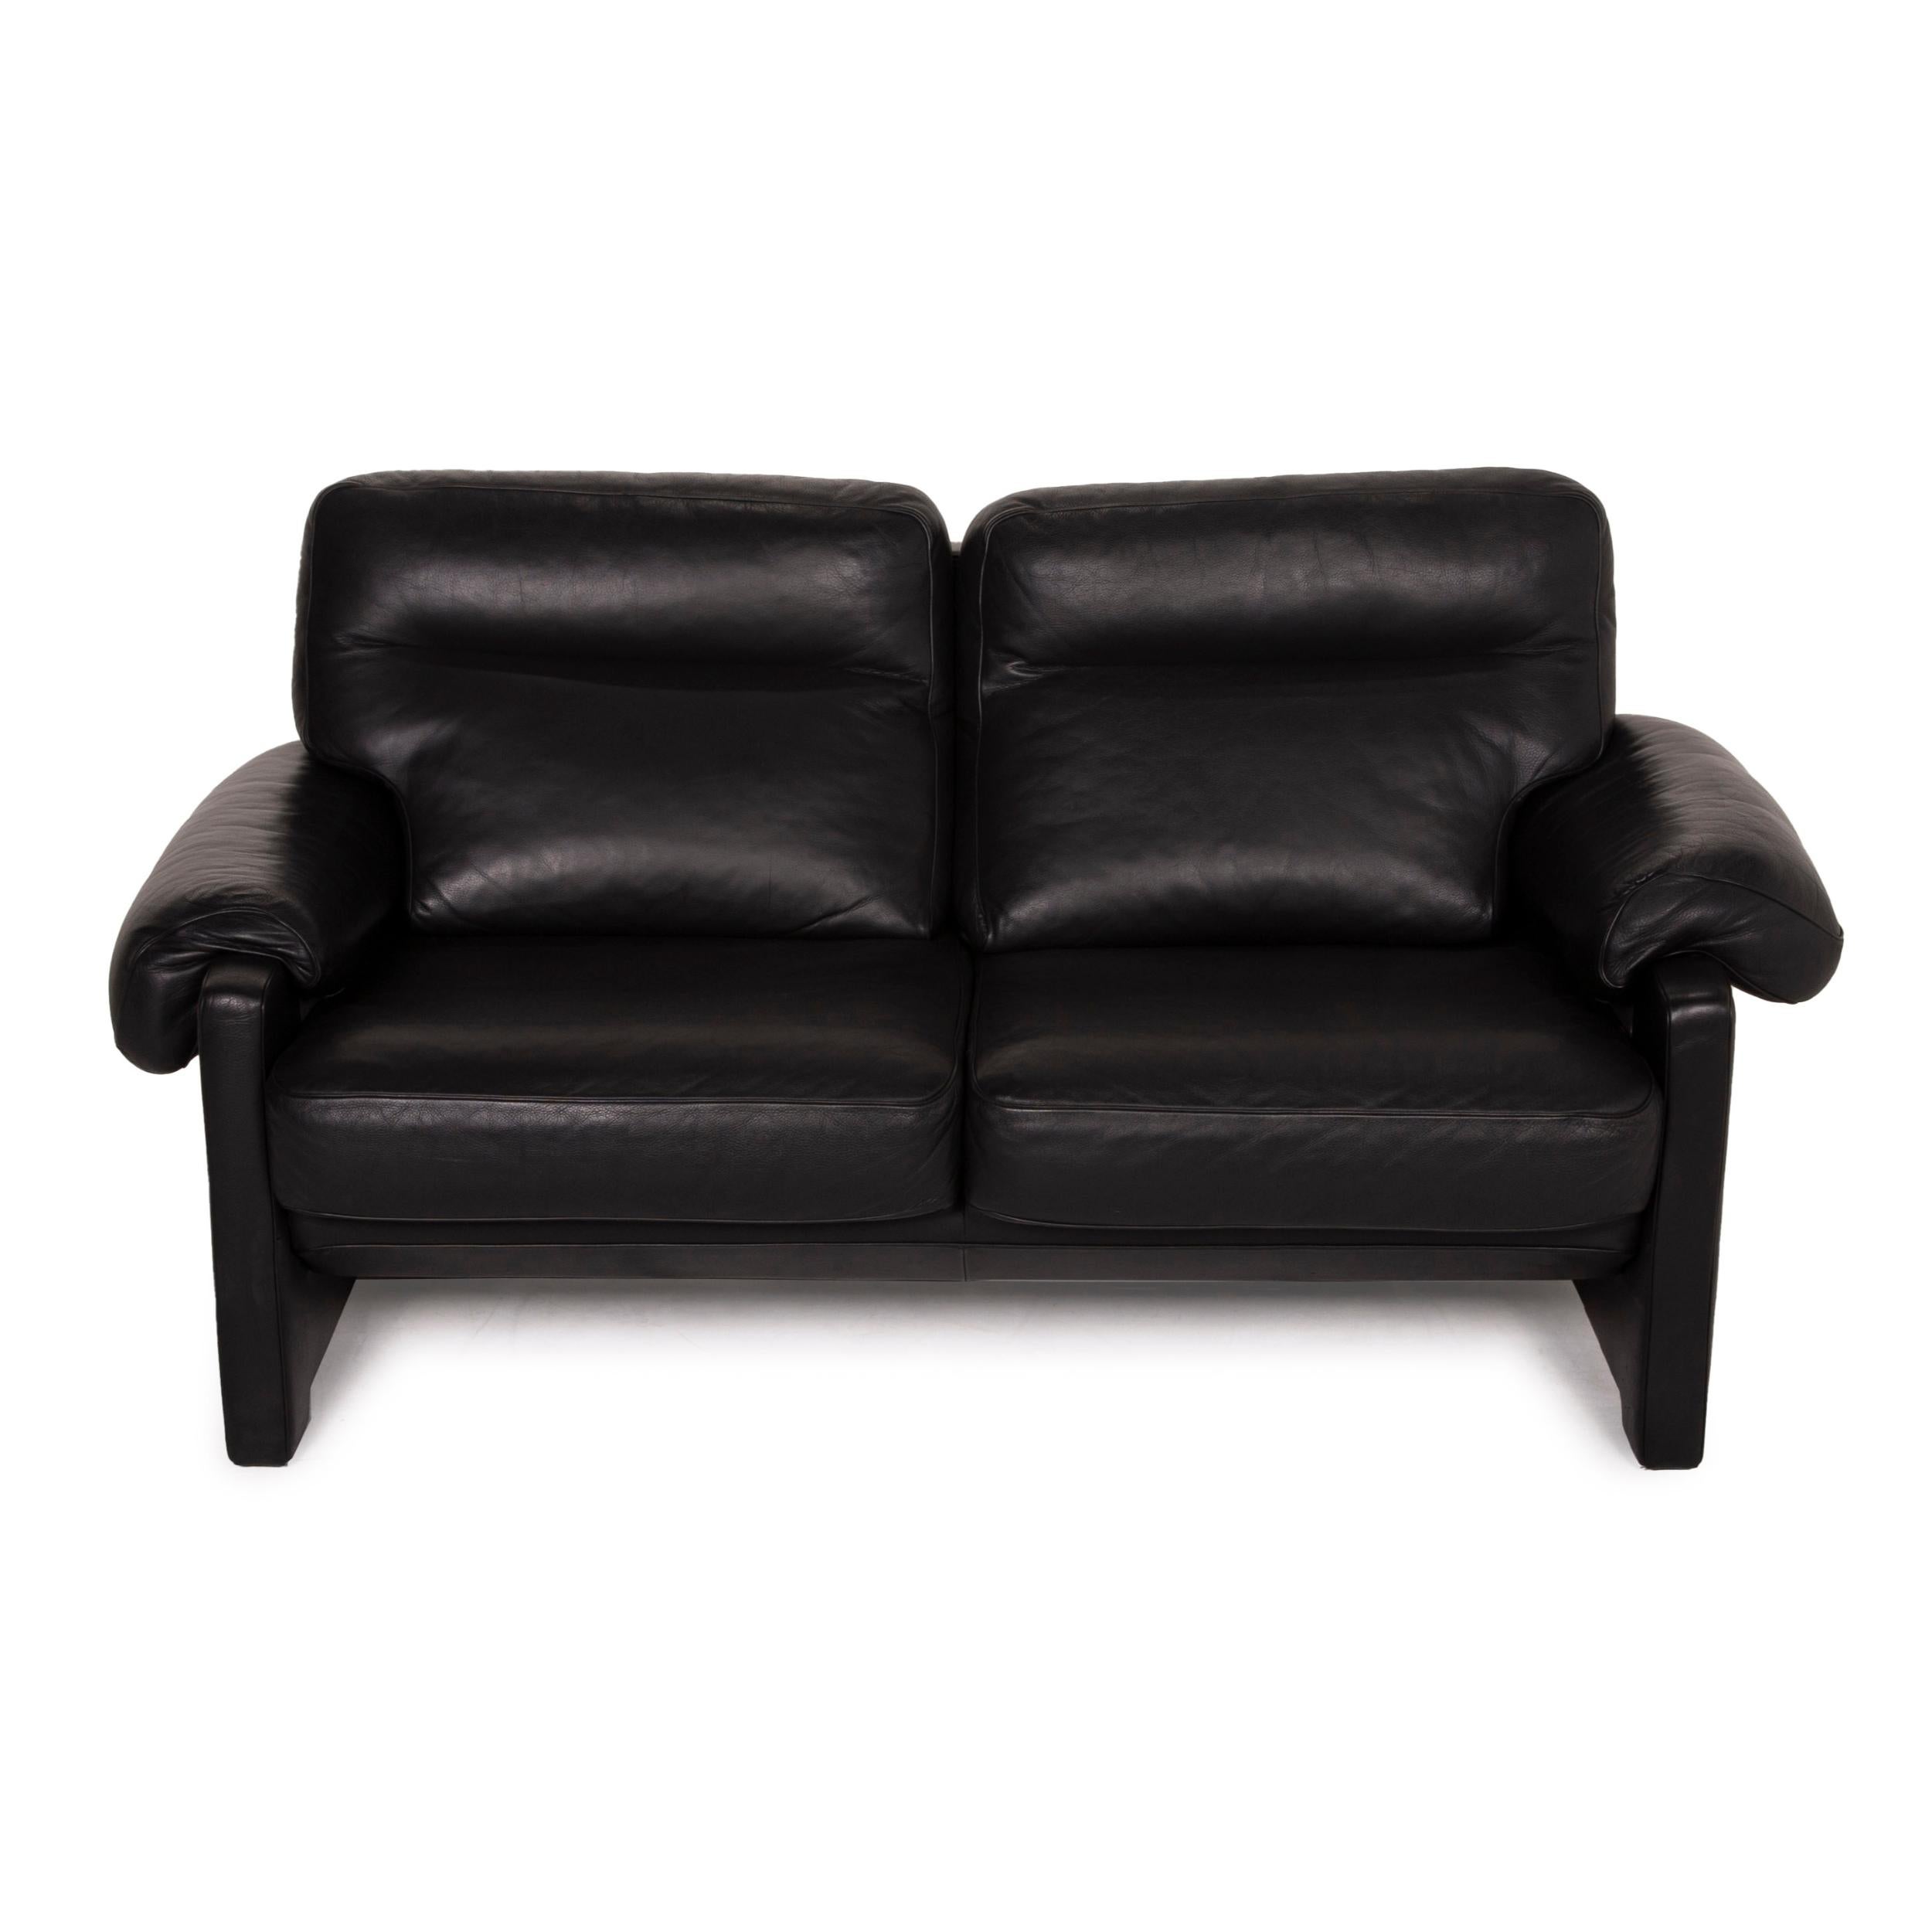 De Sede ds 70 Leather Sofa Black Two-Seater For Sale 1